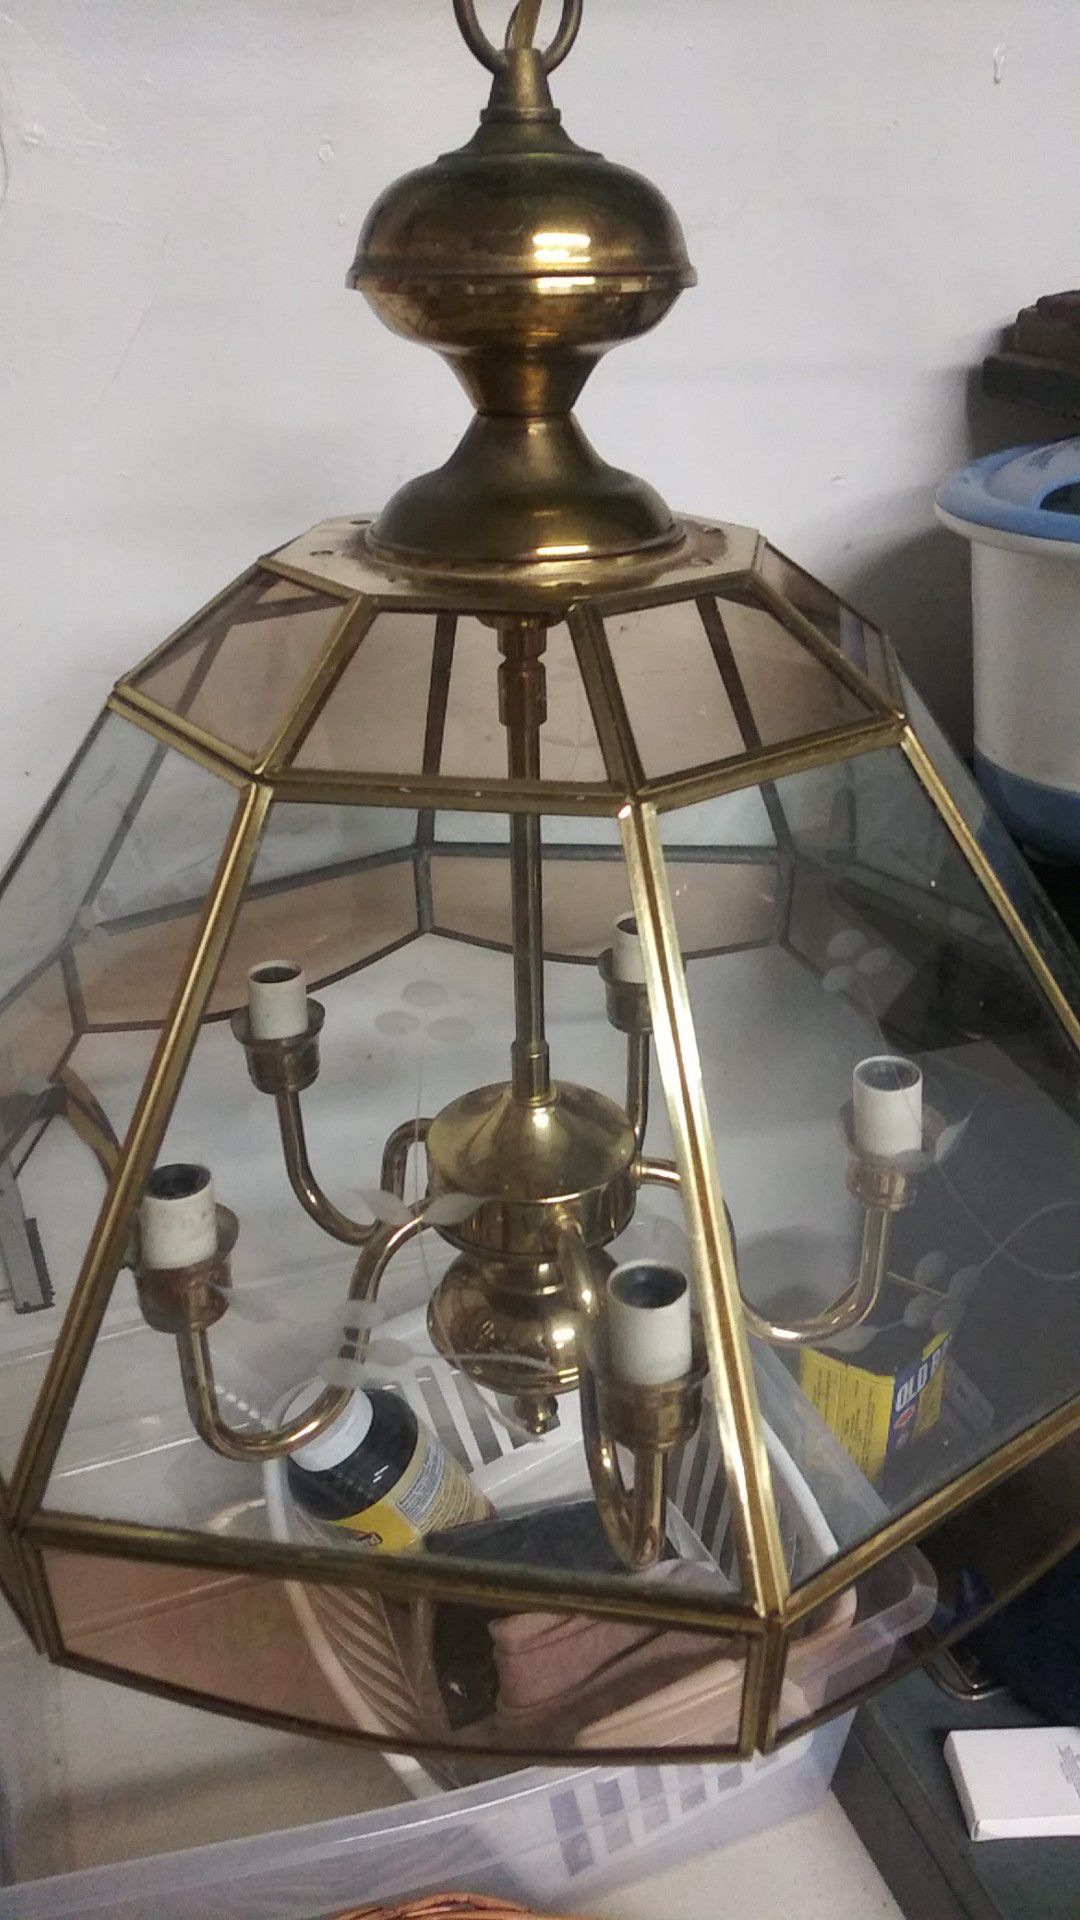 Vintage Sears Hanging lamp. brass and glass pannels.